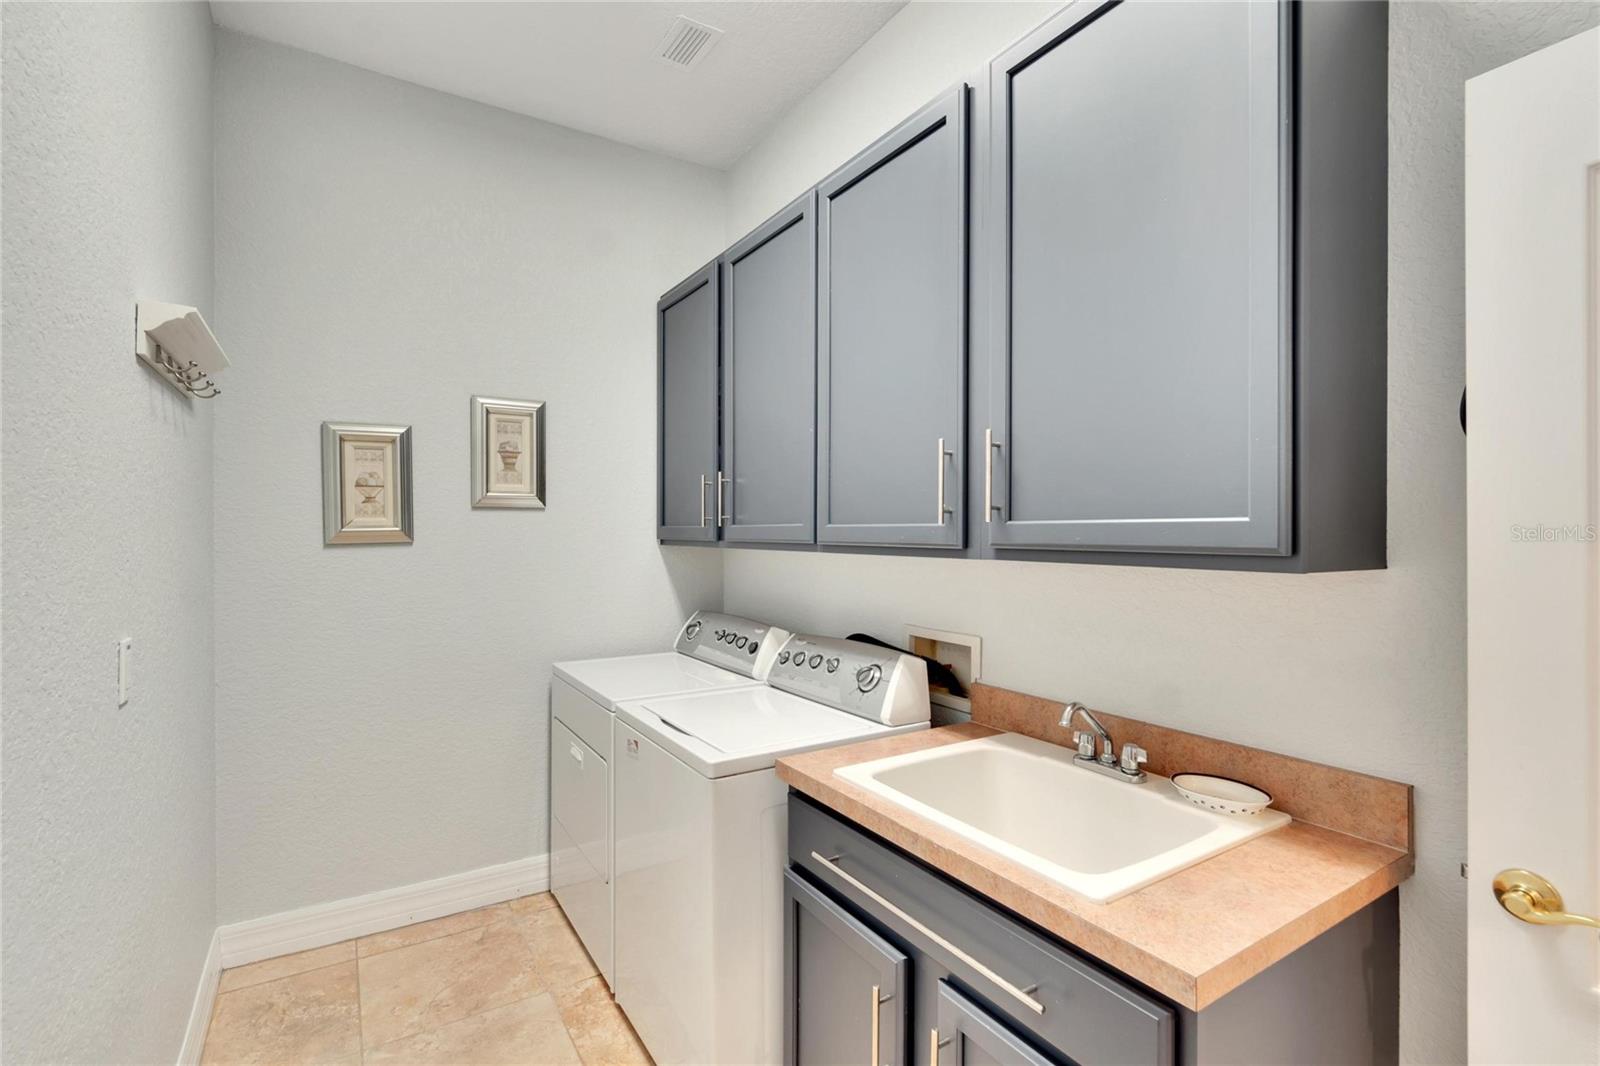 Laundry Room with sink and tile flooring. Washer/Gas Dryer transfer upon sale. The Cabinet color is picked up in the kitchen island cabinet marrying the two rooms when the door is open.